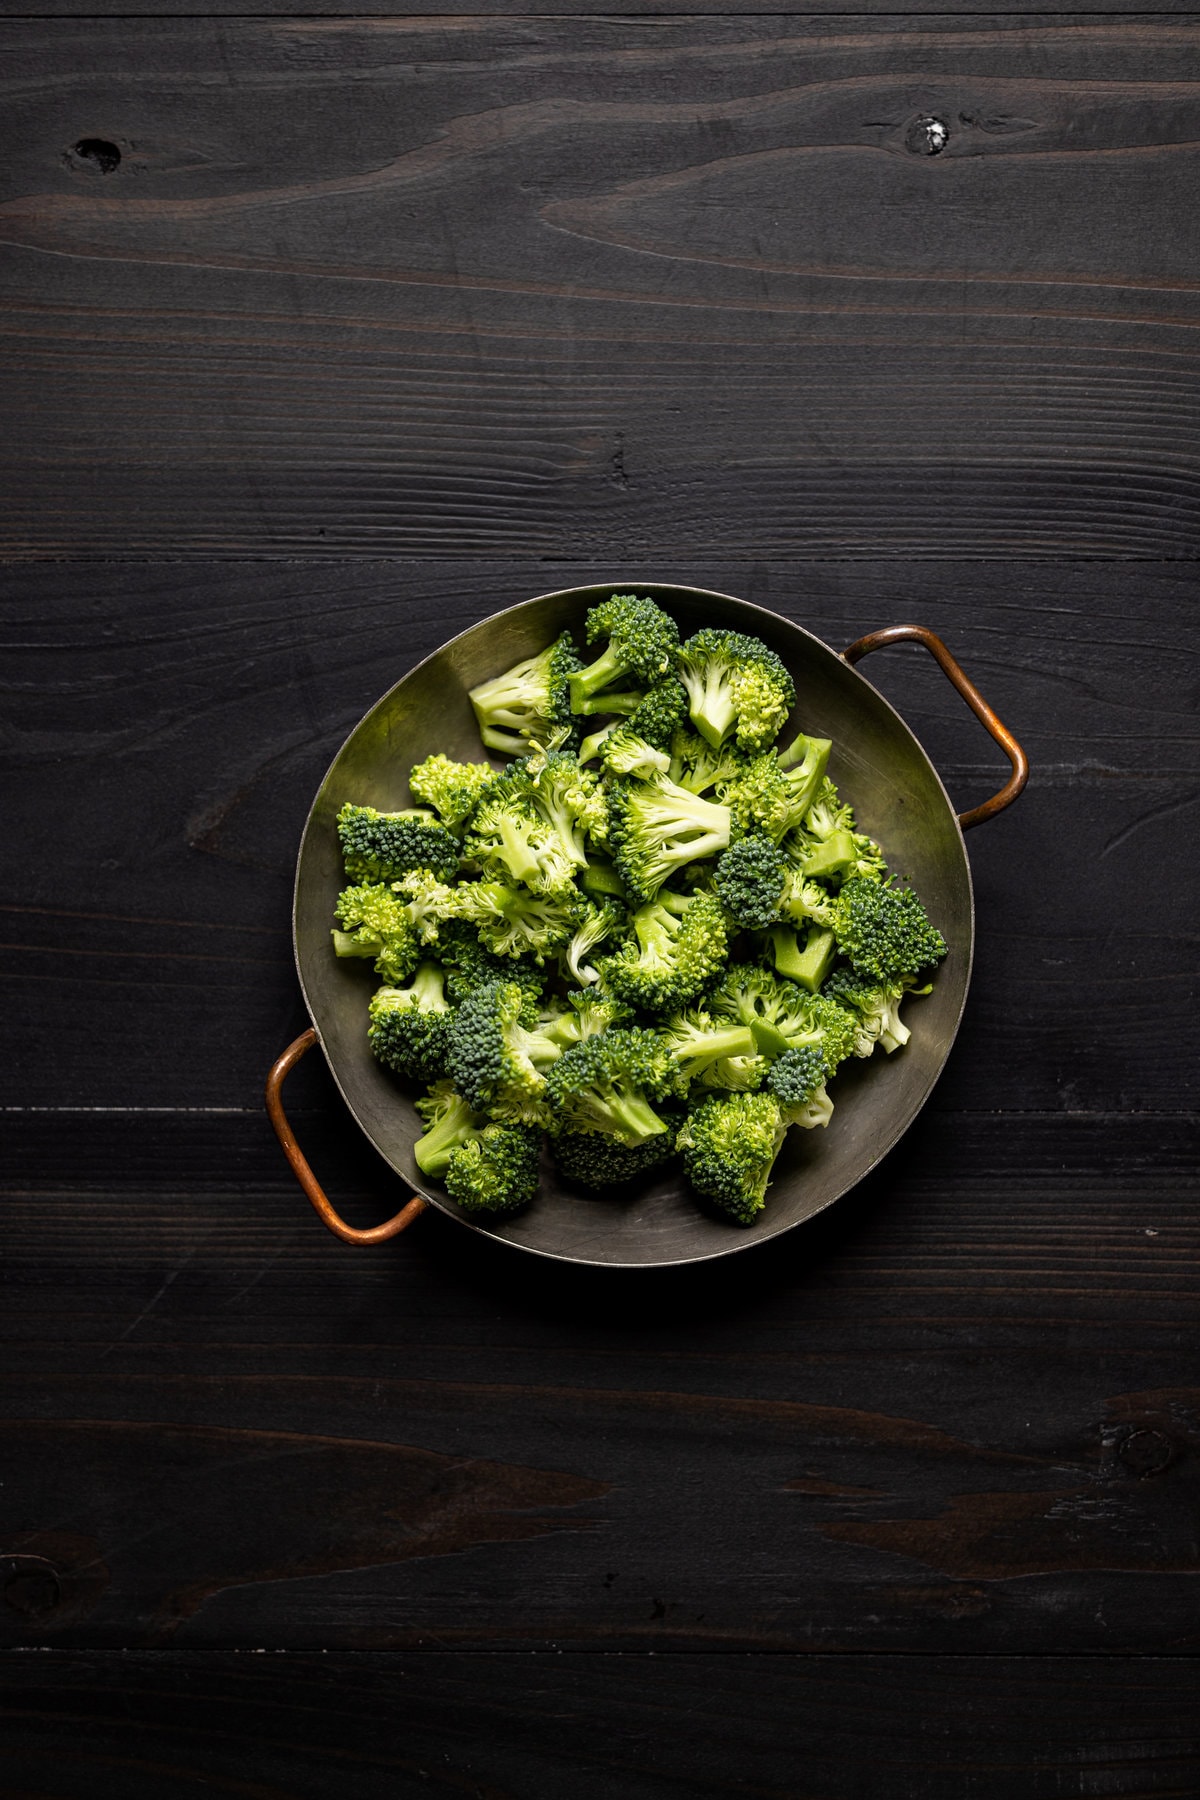 Broccoli in a pan